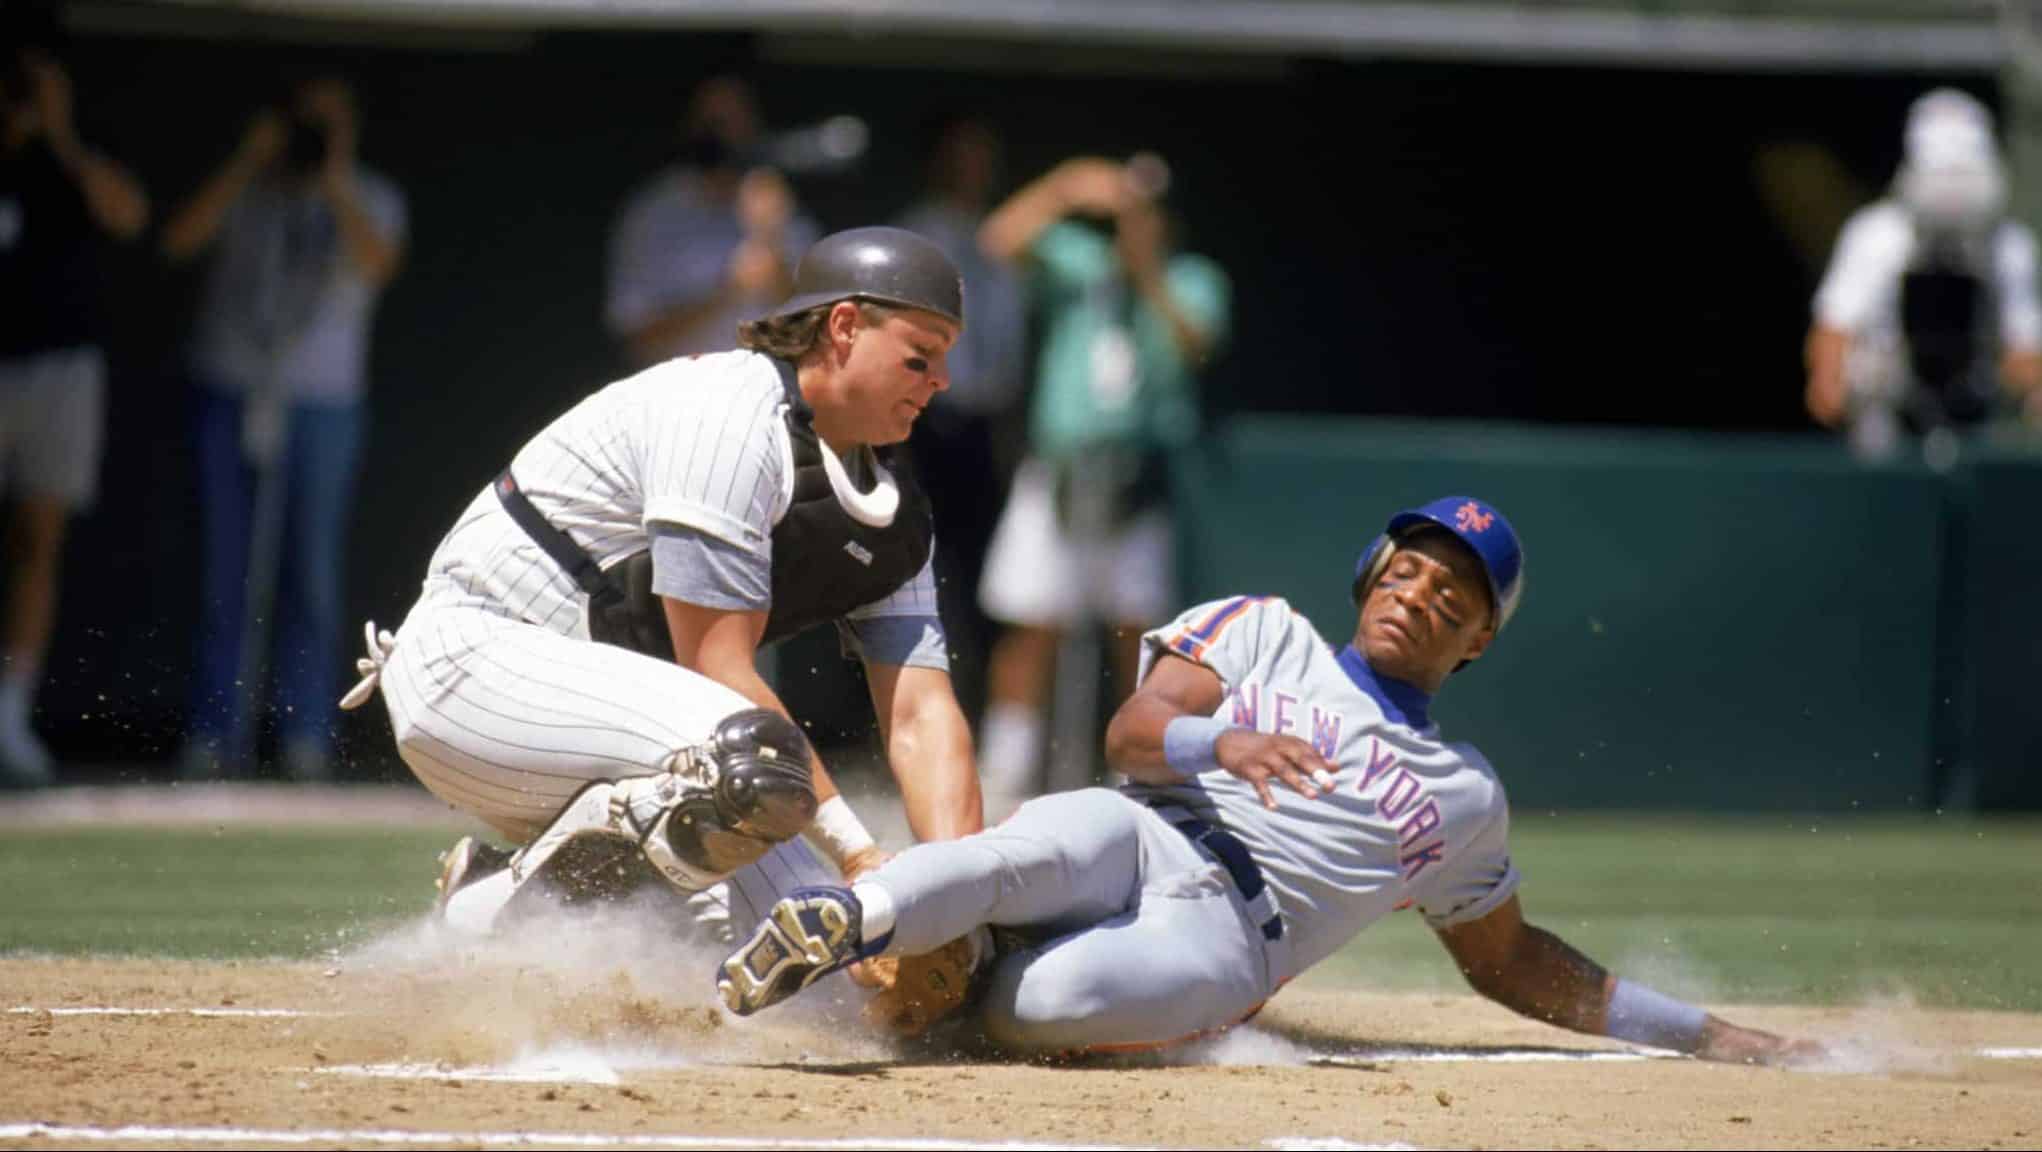 1989: Darryl Strawberry of the New York Mets slides into home during a game in the 1989 season against the San Diego Padres.